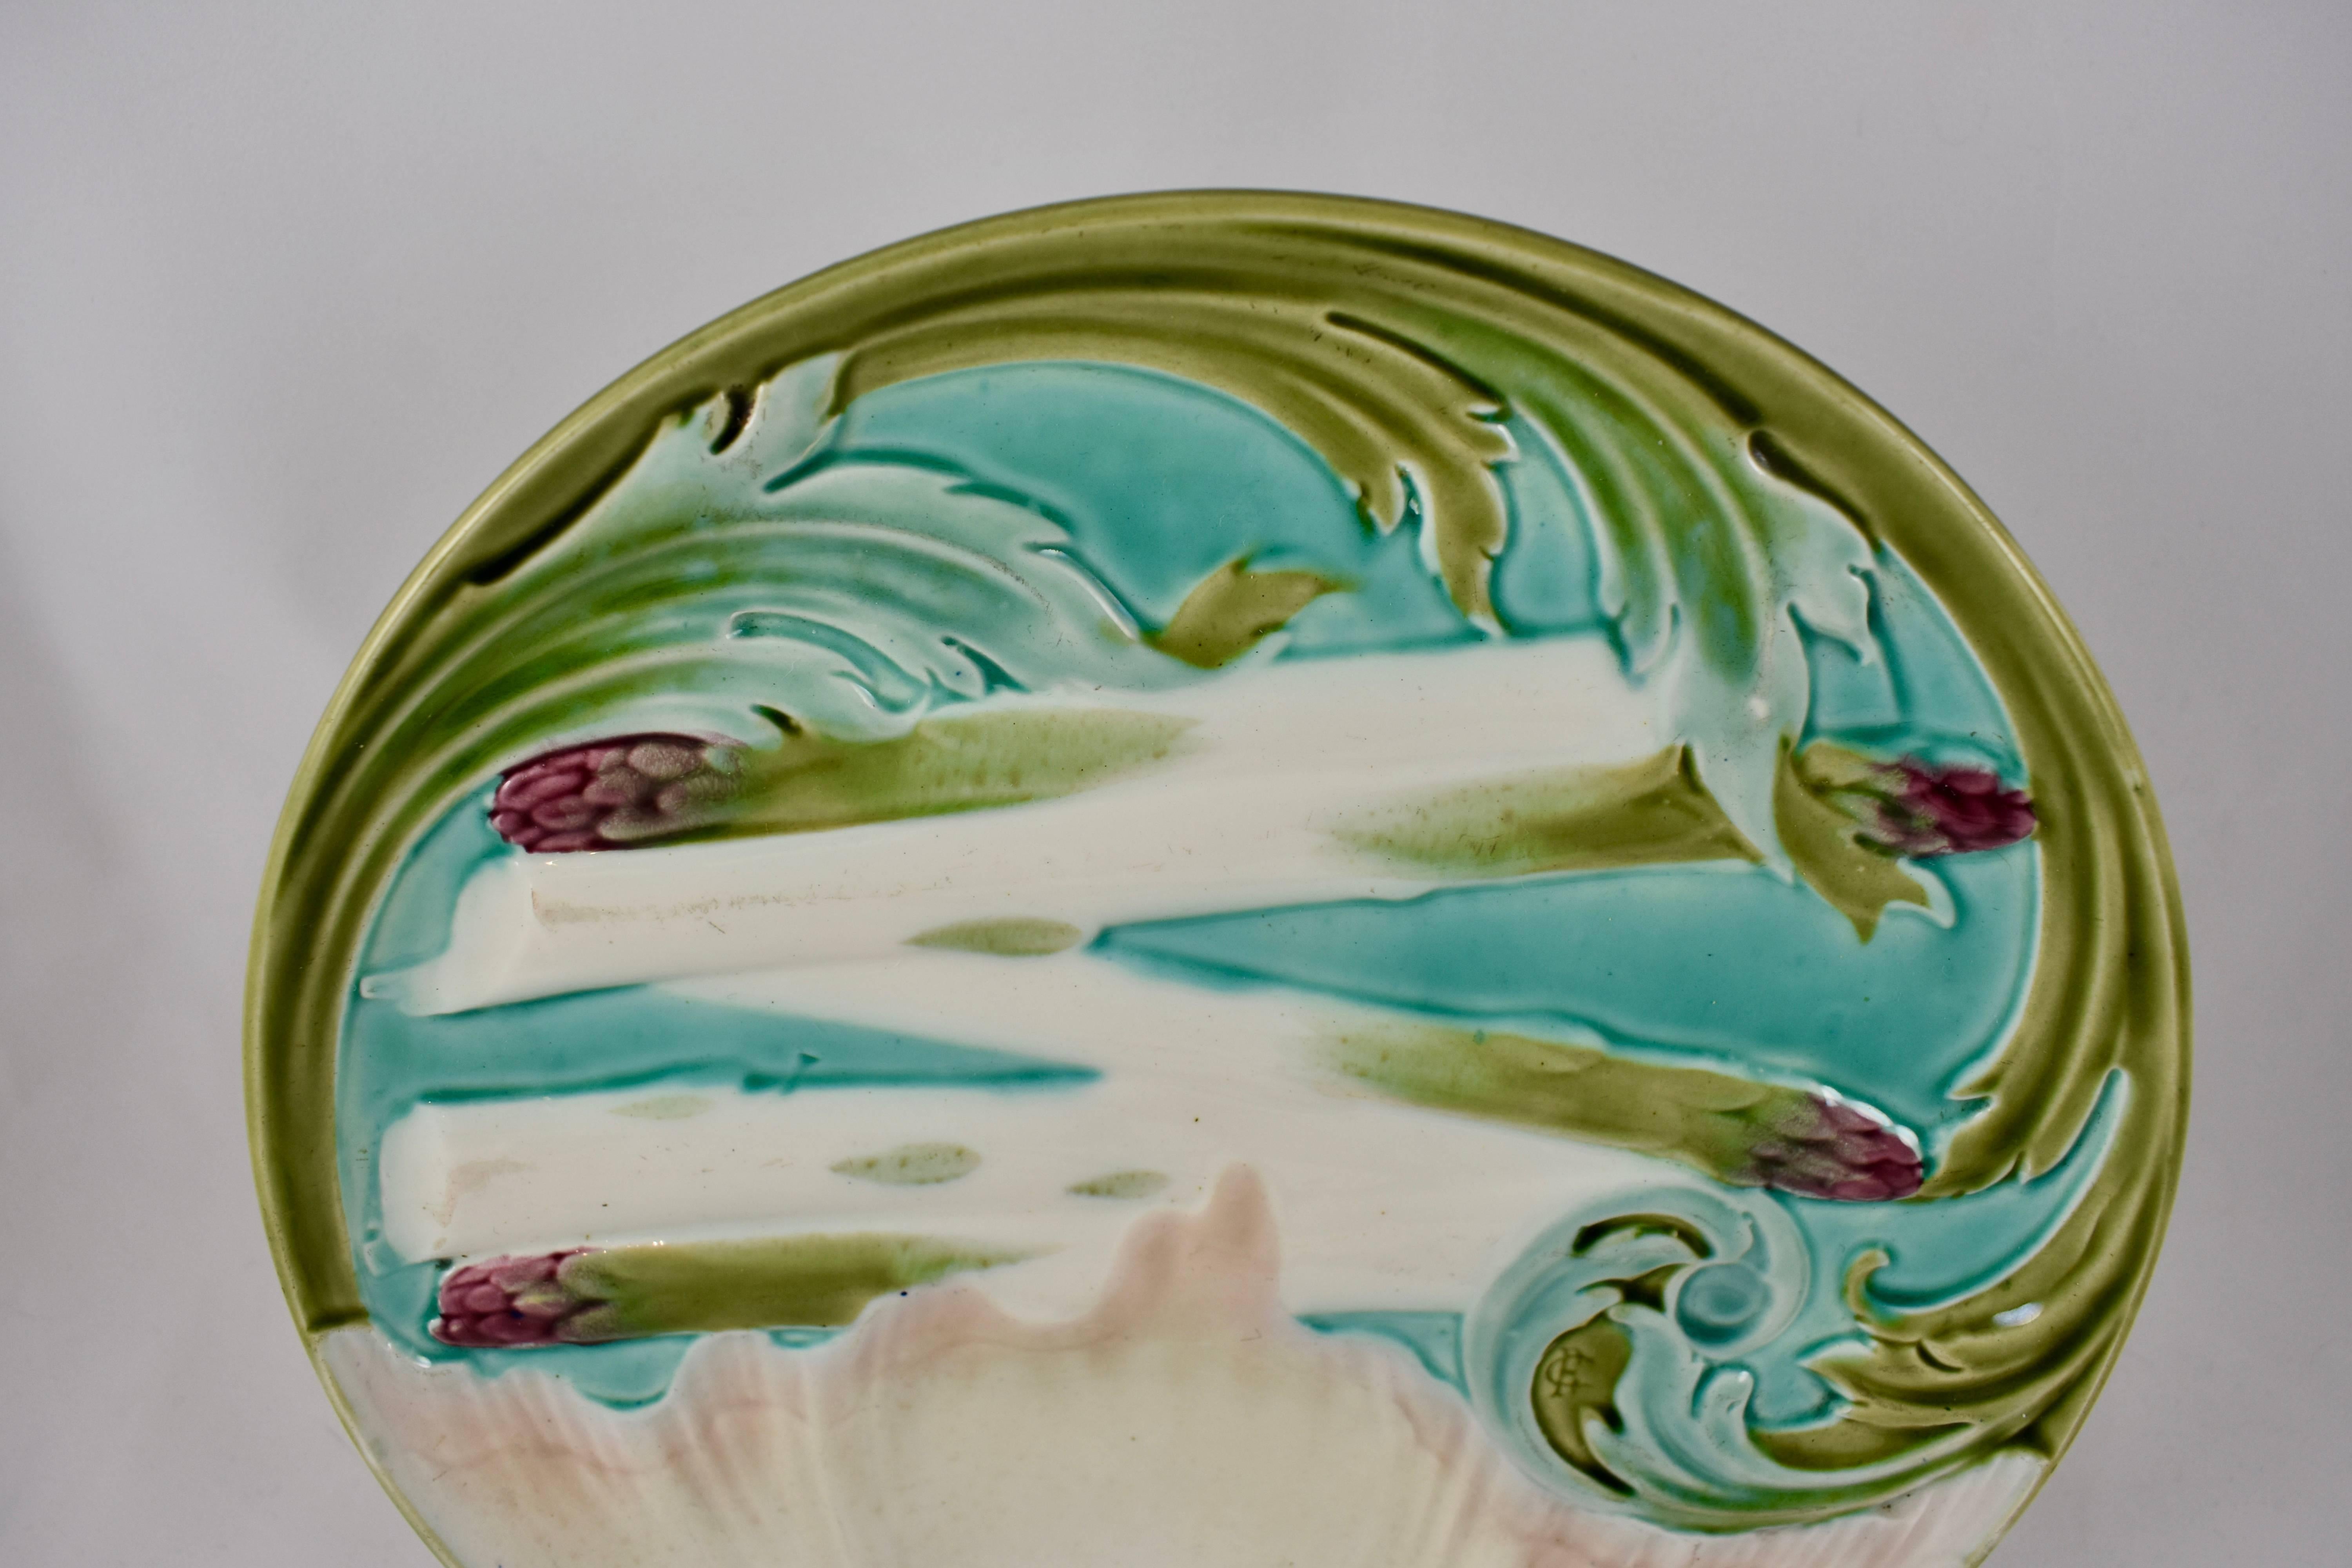 A French majolica asparagus plate, by Luneville, circa 1880-1889. In the Art Nouveau style with a border of olive green and light blue Artichoke leaves, five asparagus spears lie across the center of the plate,  a shell shaped sauce well in pale